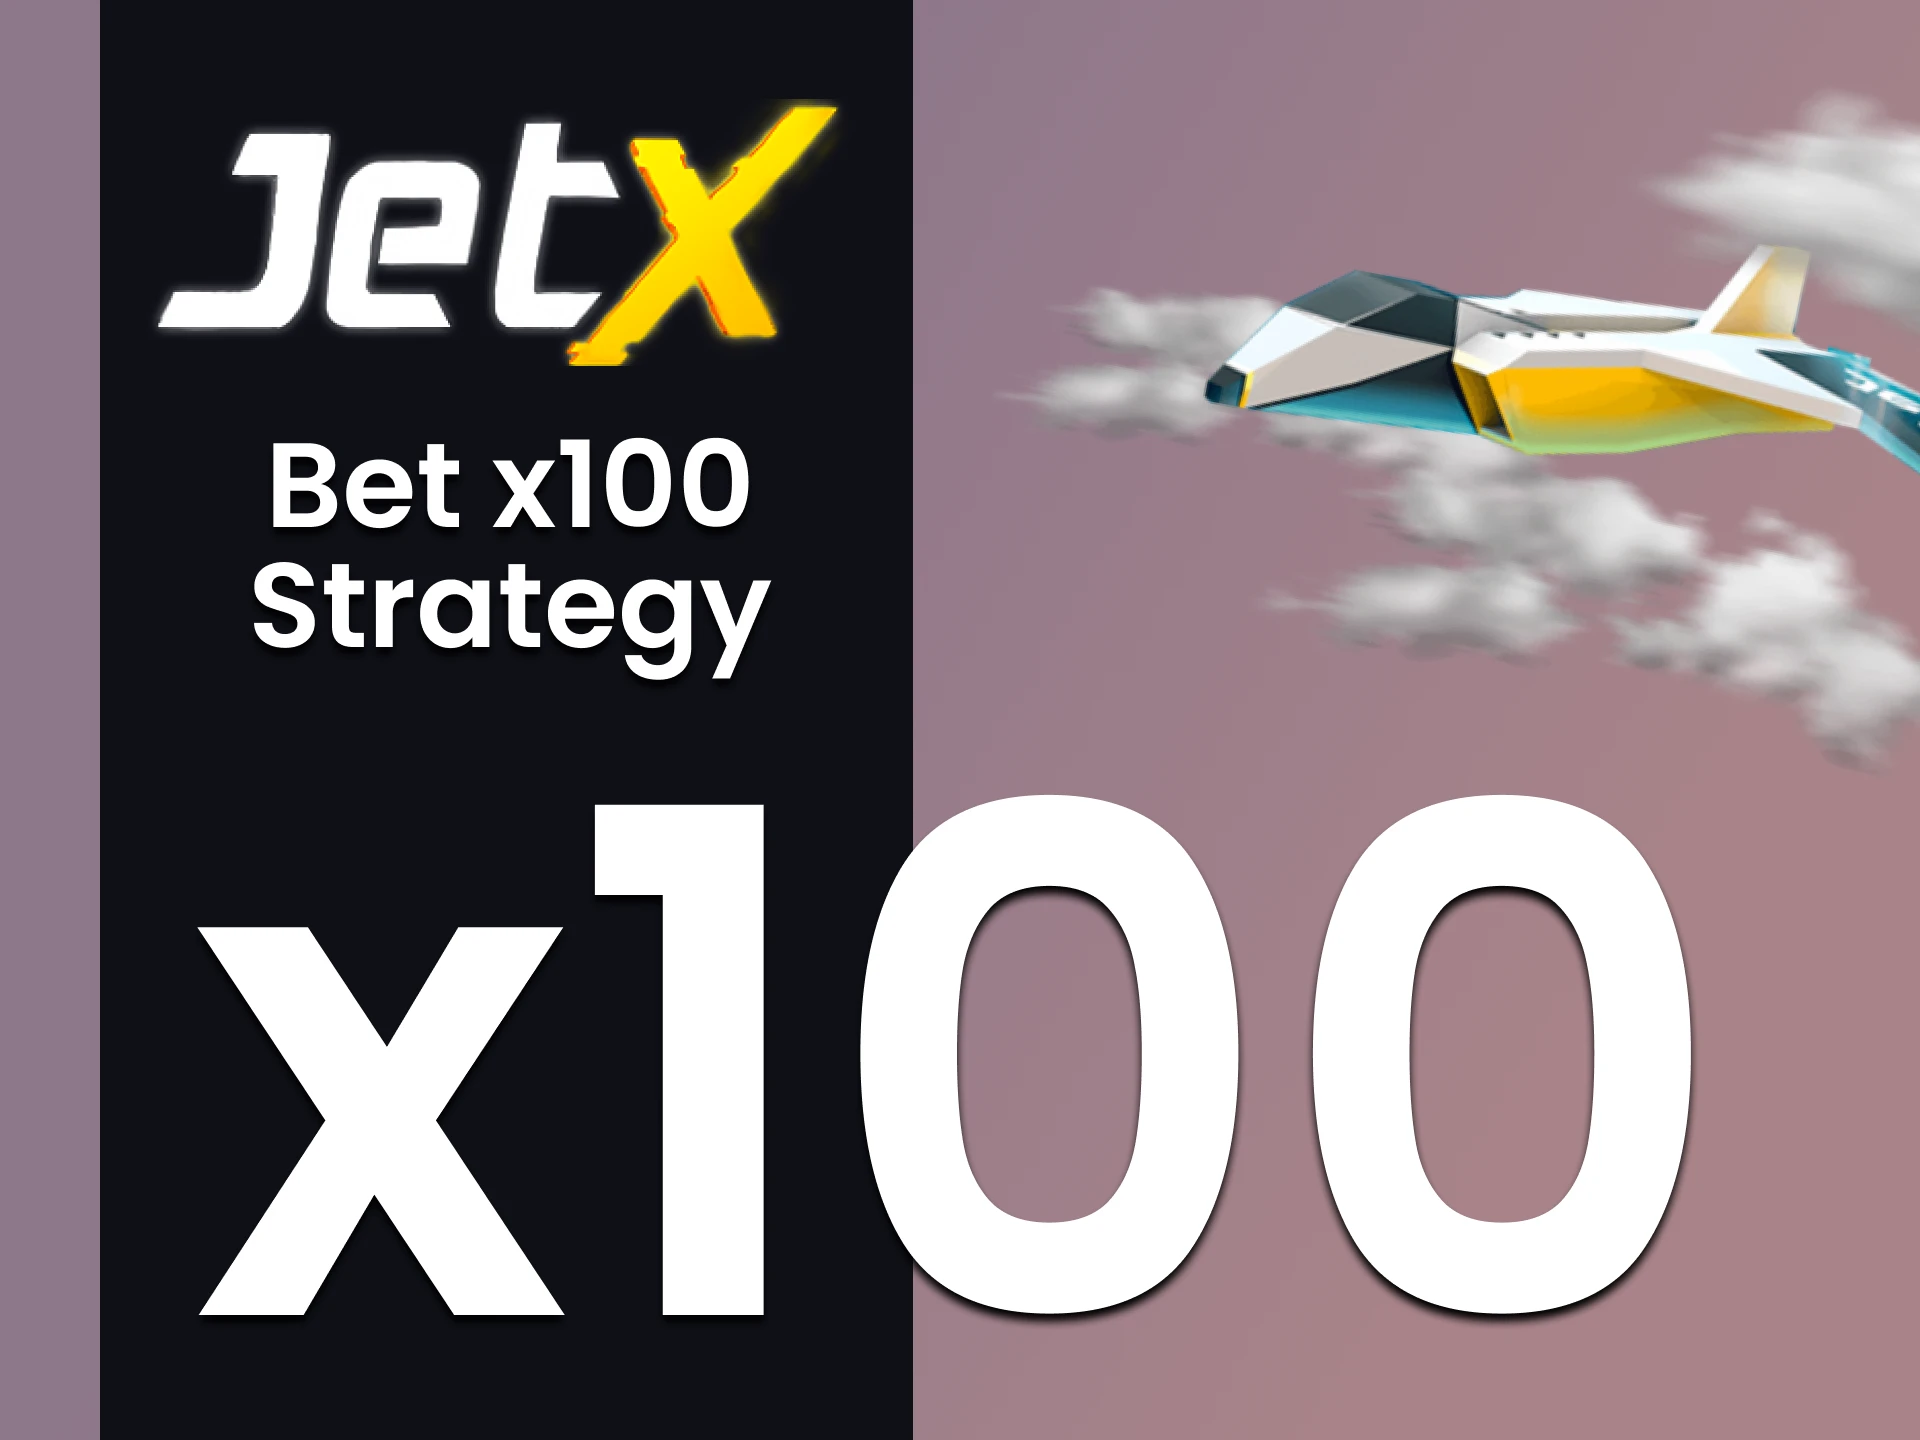 We advise you the x100 strategy to win JetX.